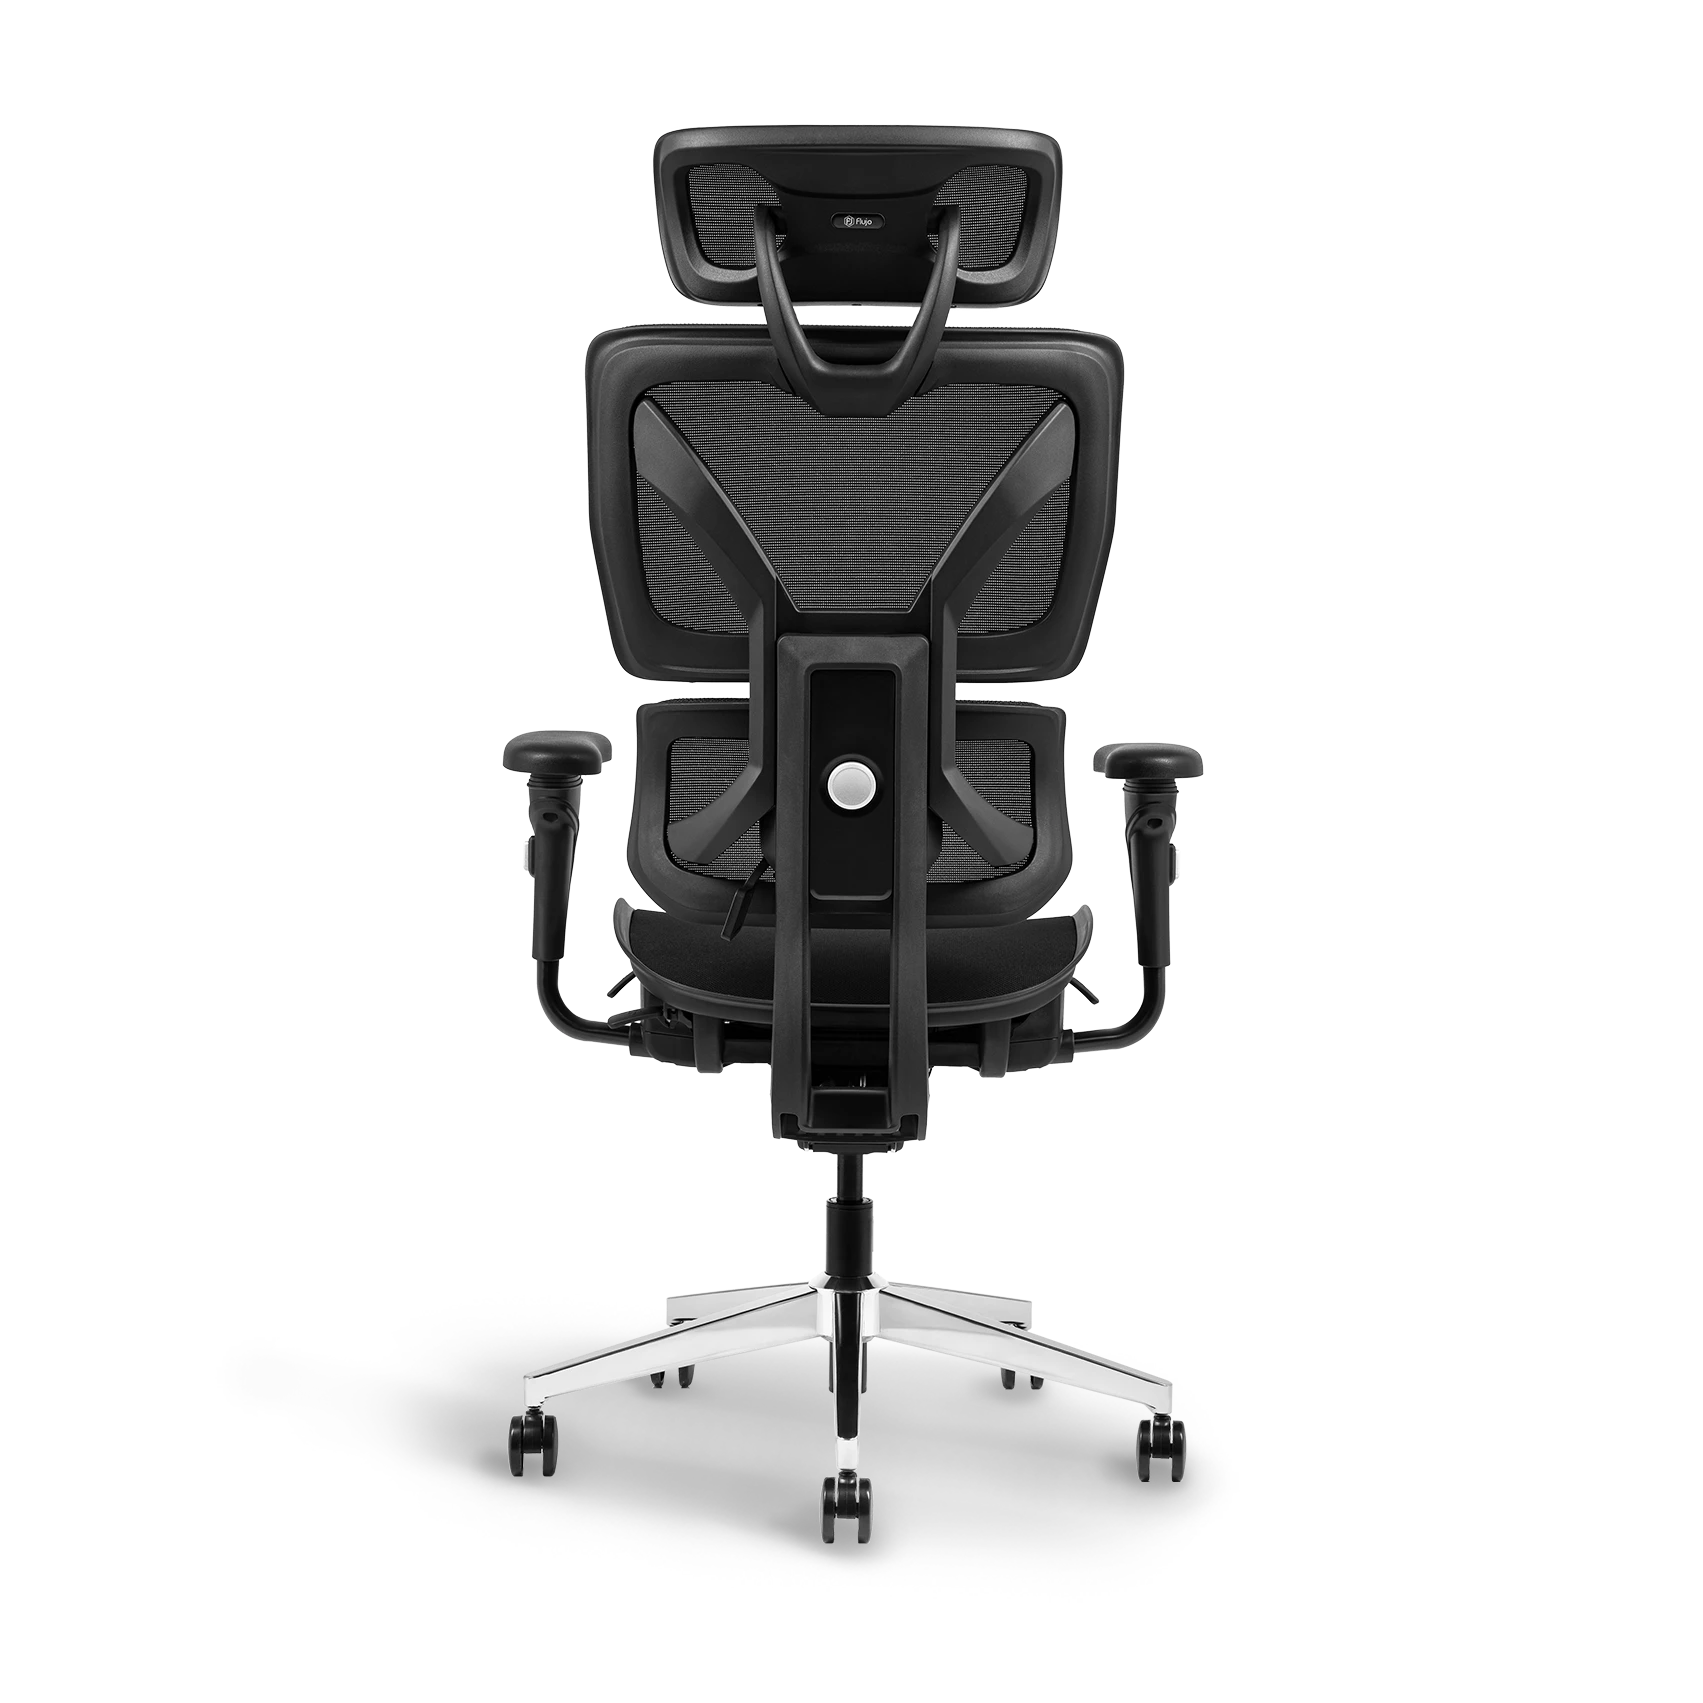 Back view of Ayla Ergonomic Chair Black showcasing the breathable mesh back and sturdy support for ergonomic seating.